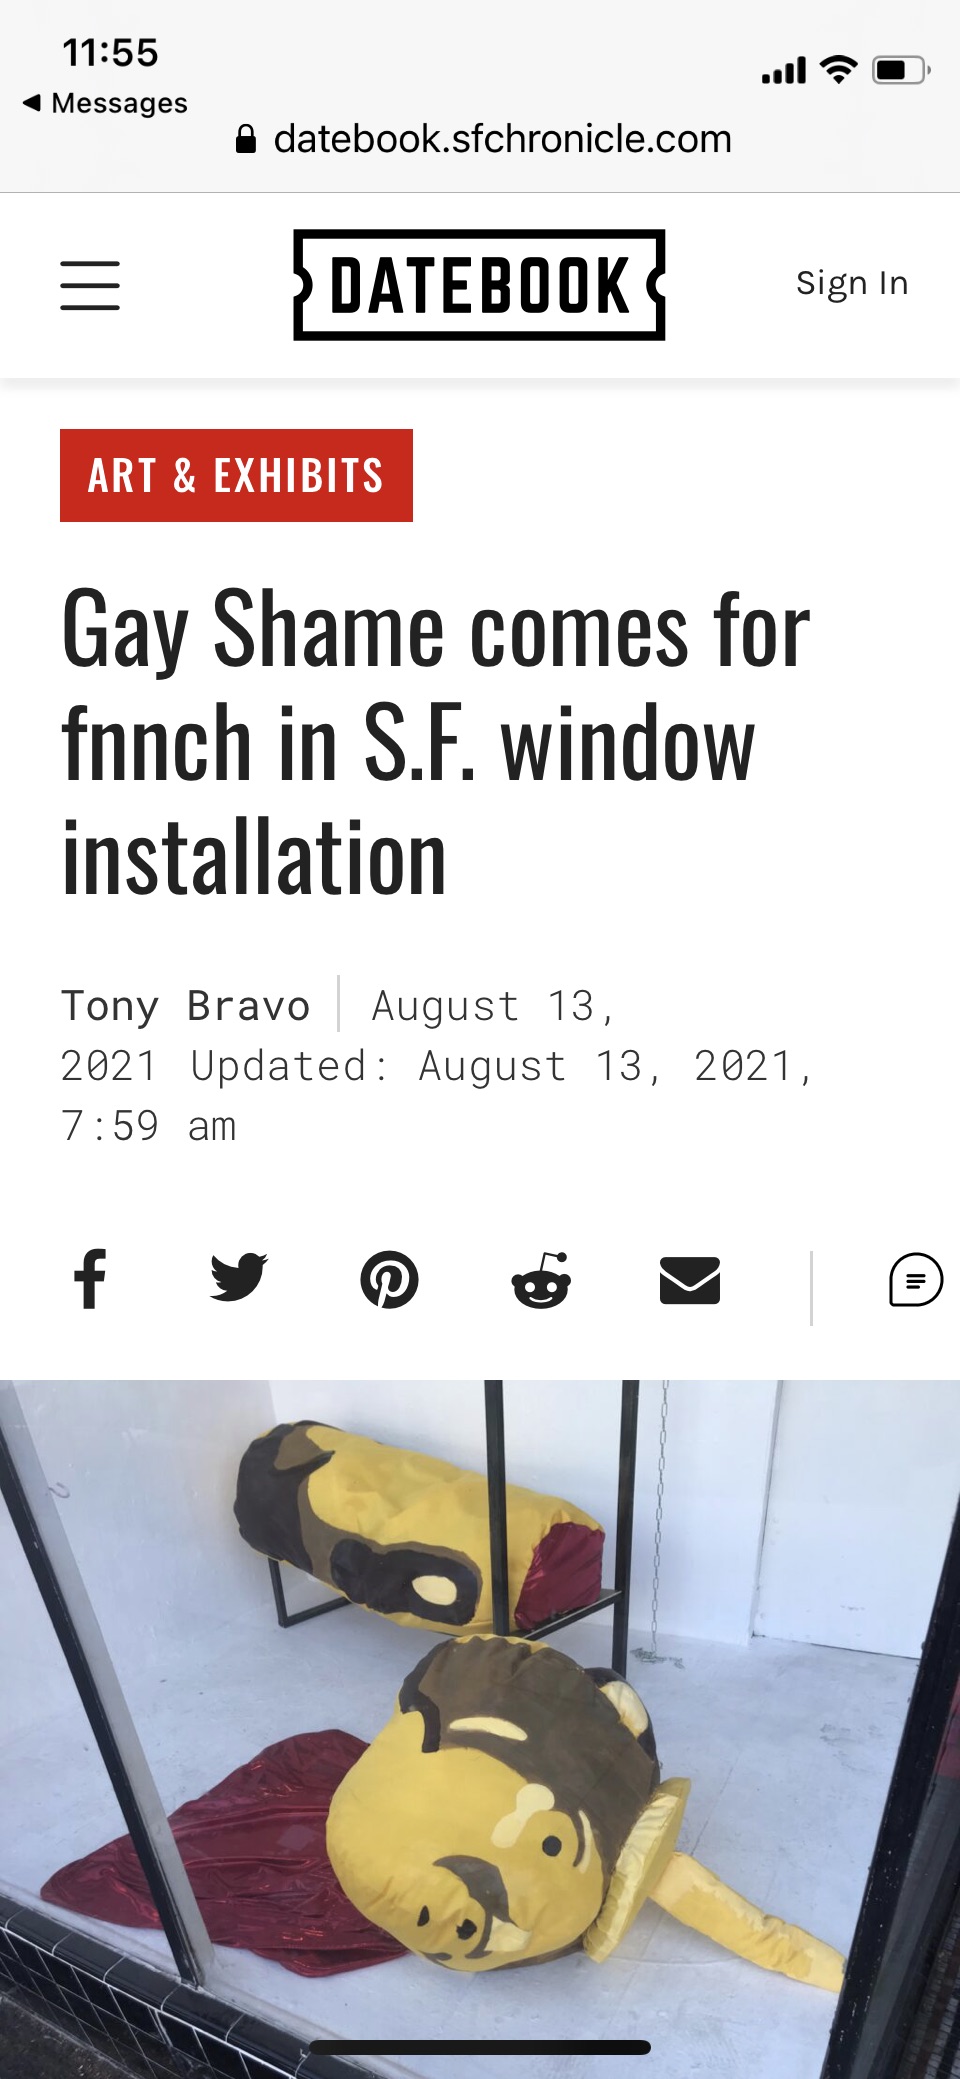 SF Chronicle art review: "Gay Shame comes for fnnch in S.F. window installation"